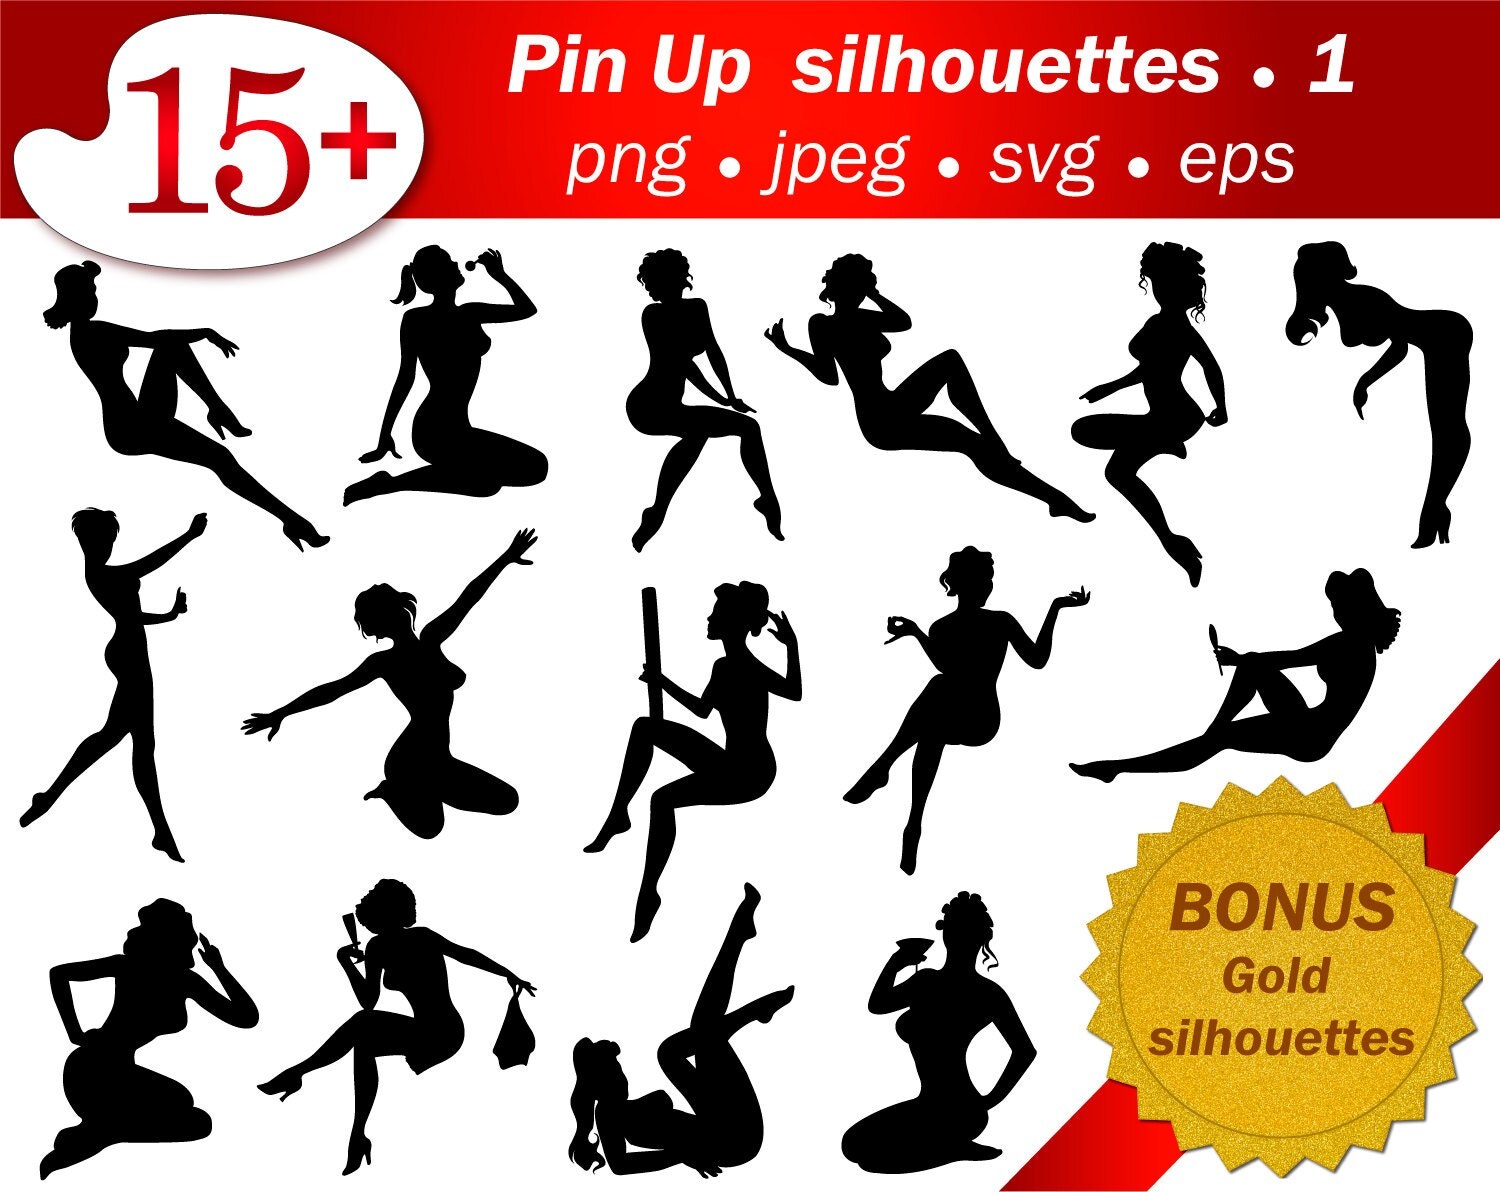 Download Stencil SVG silhouette pin up girl Silhouette cameo files PNG